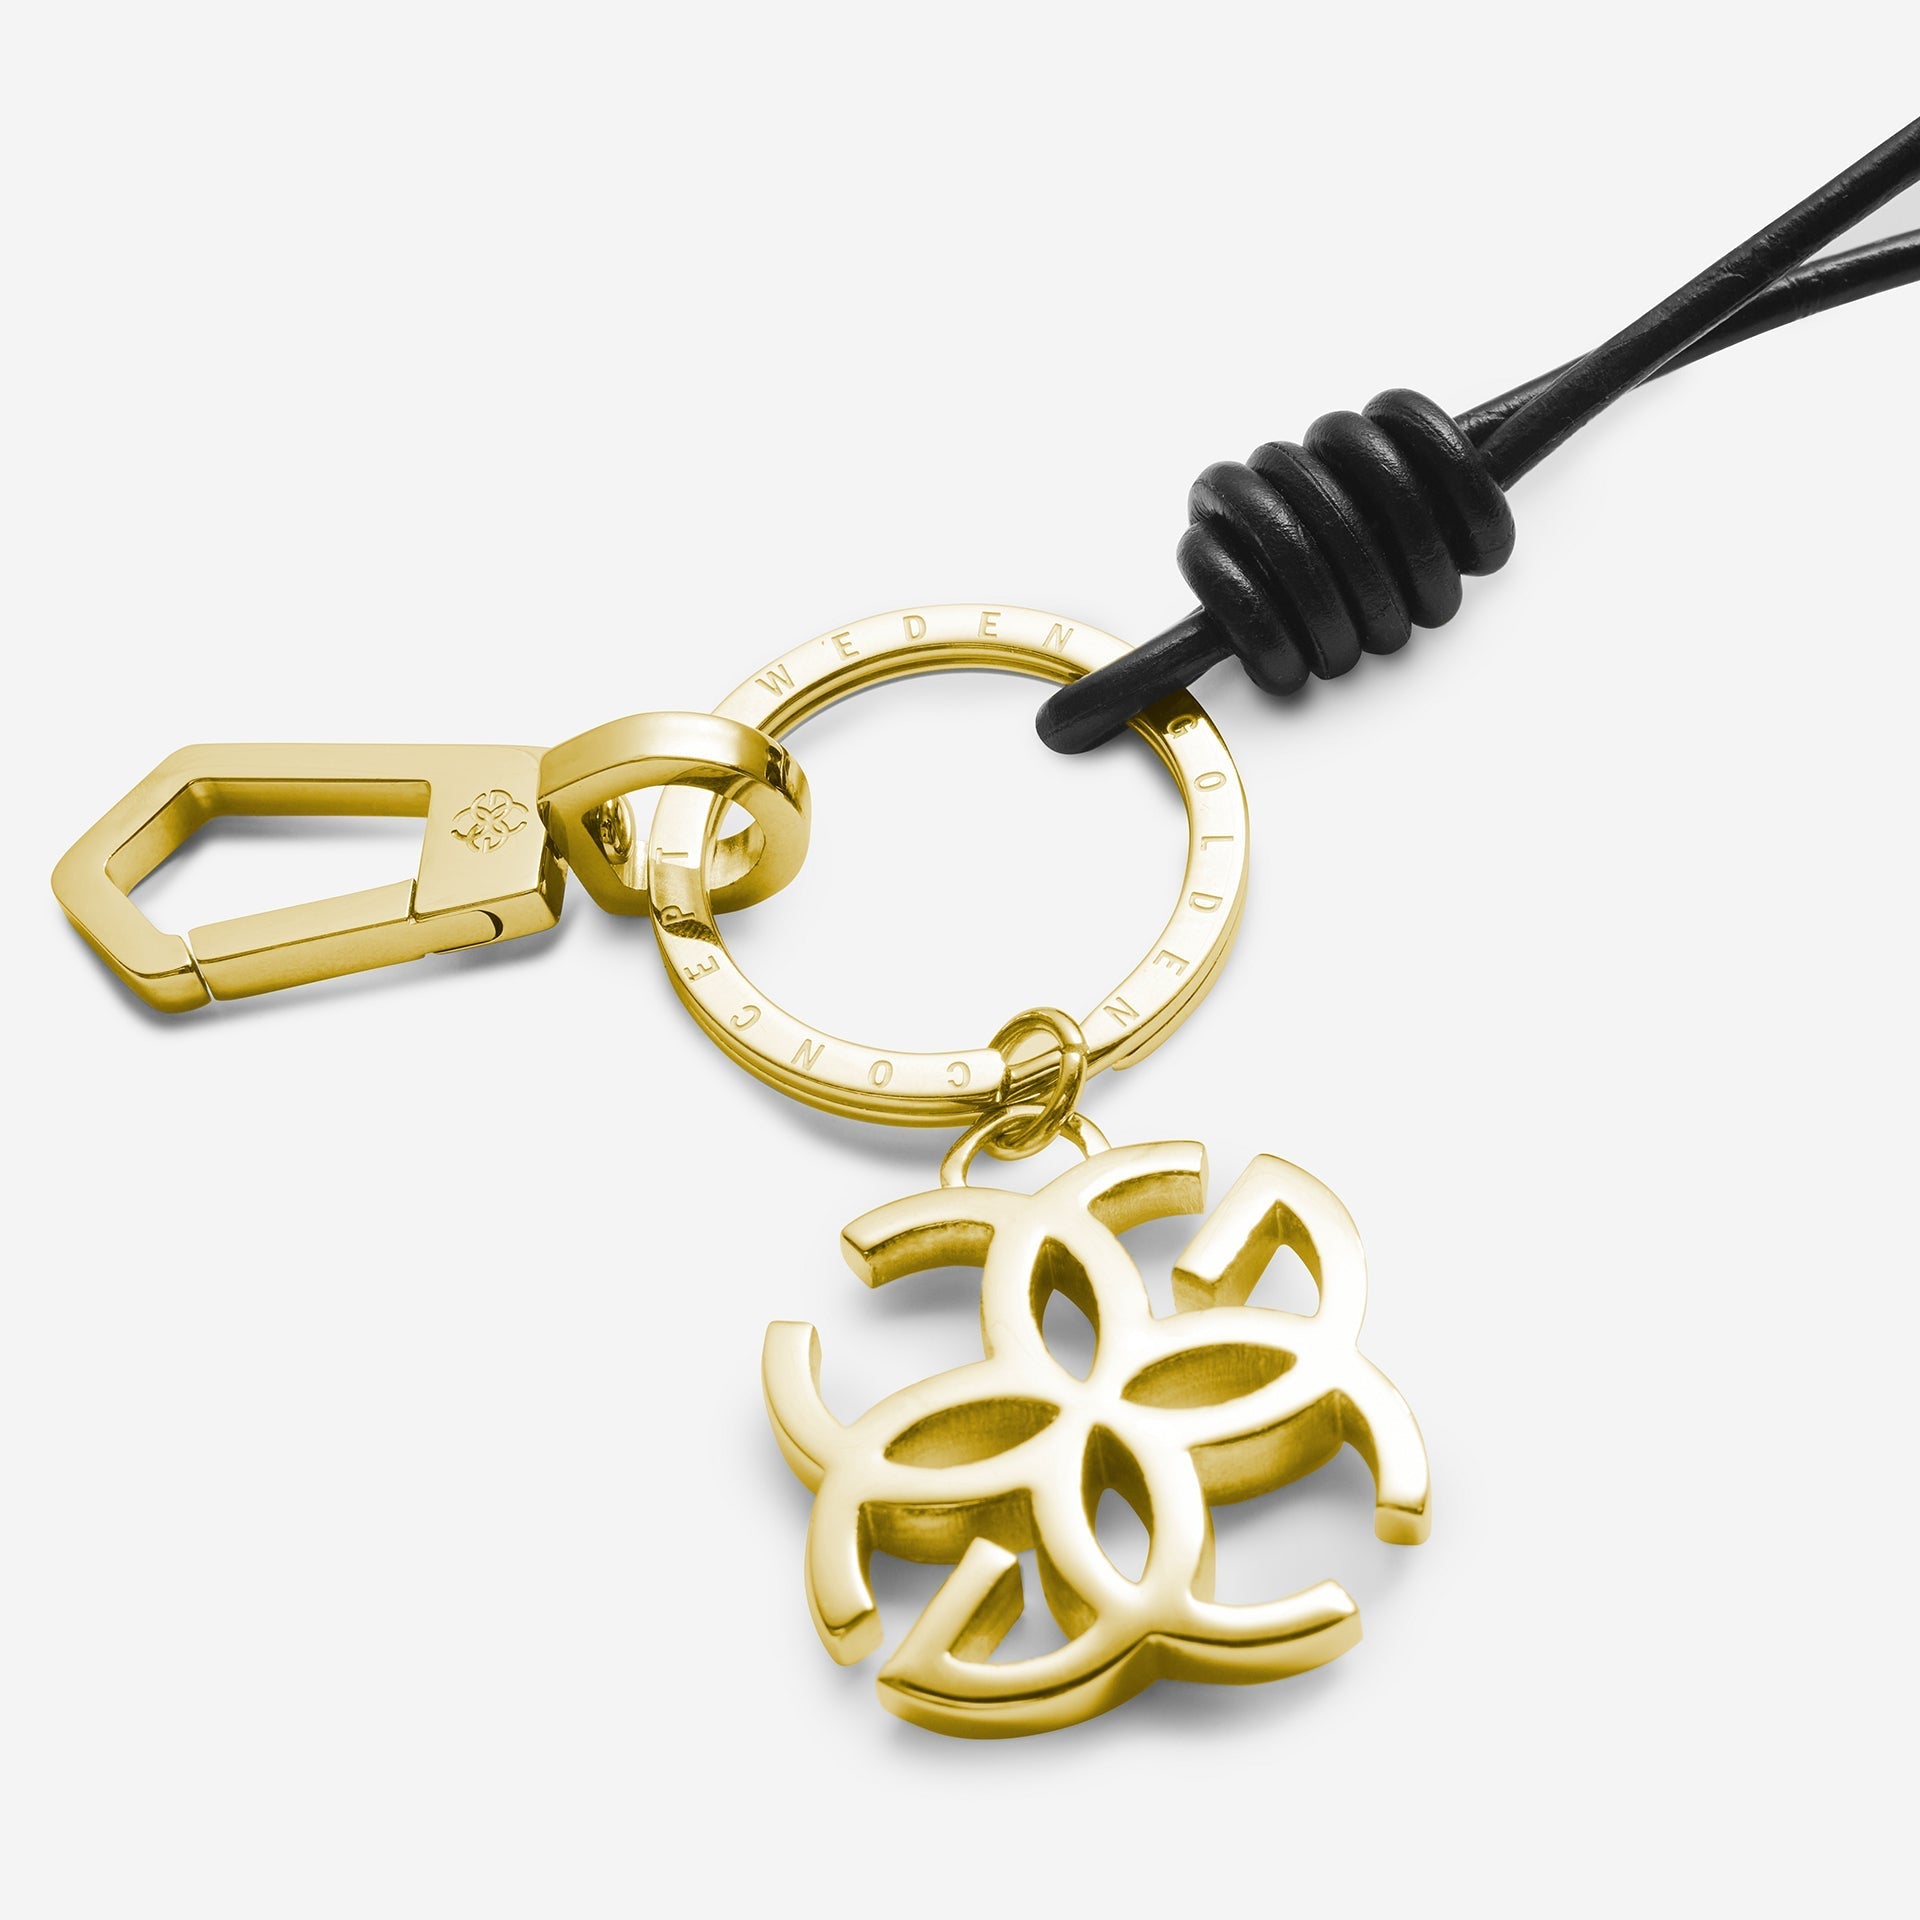 Golden Concept - Leather Accessories - Keychain - Rope Gold